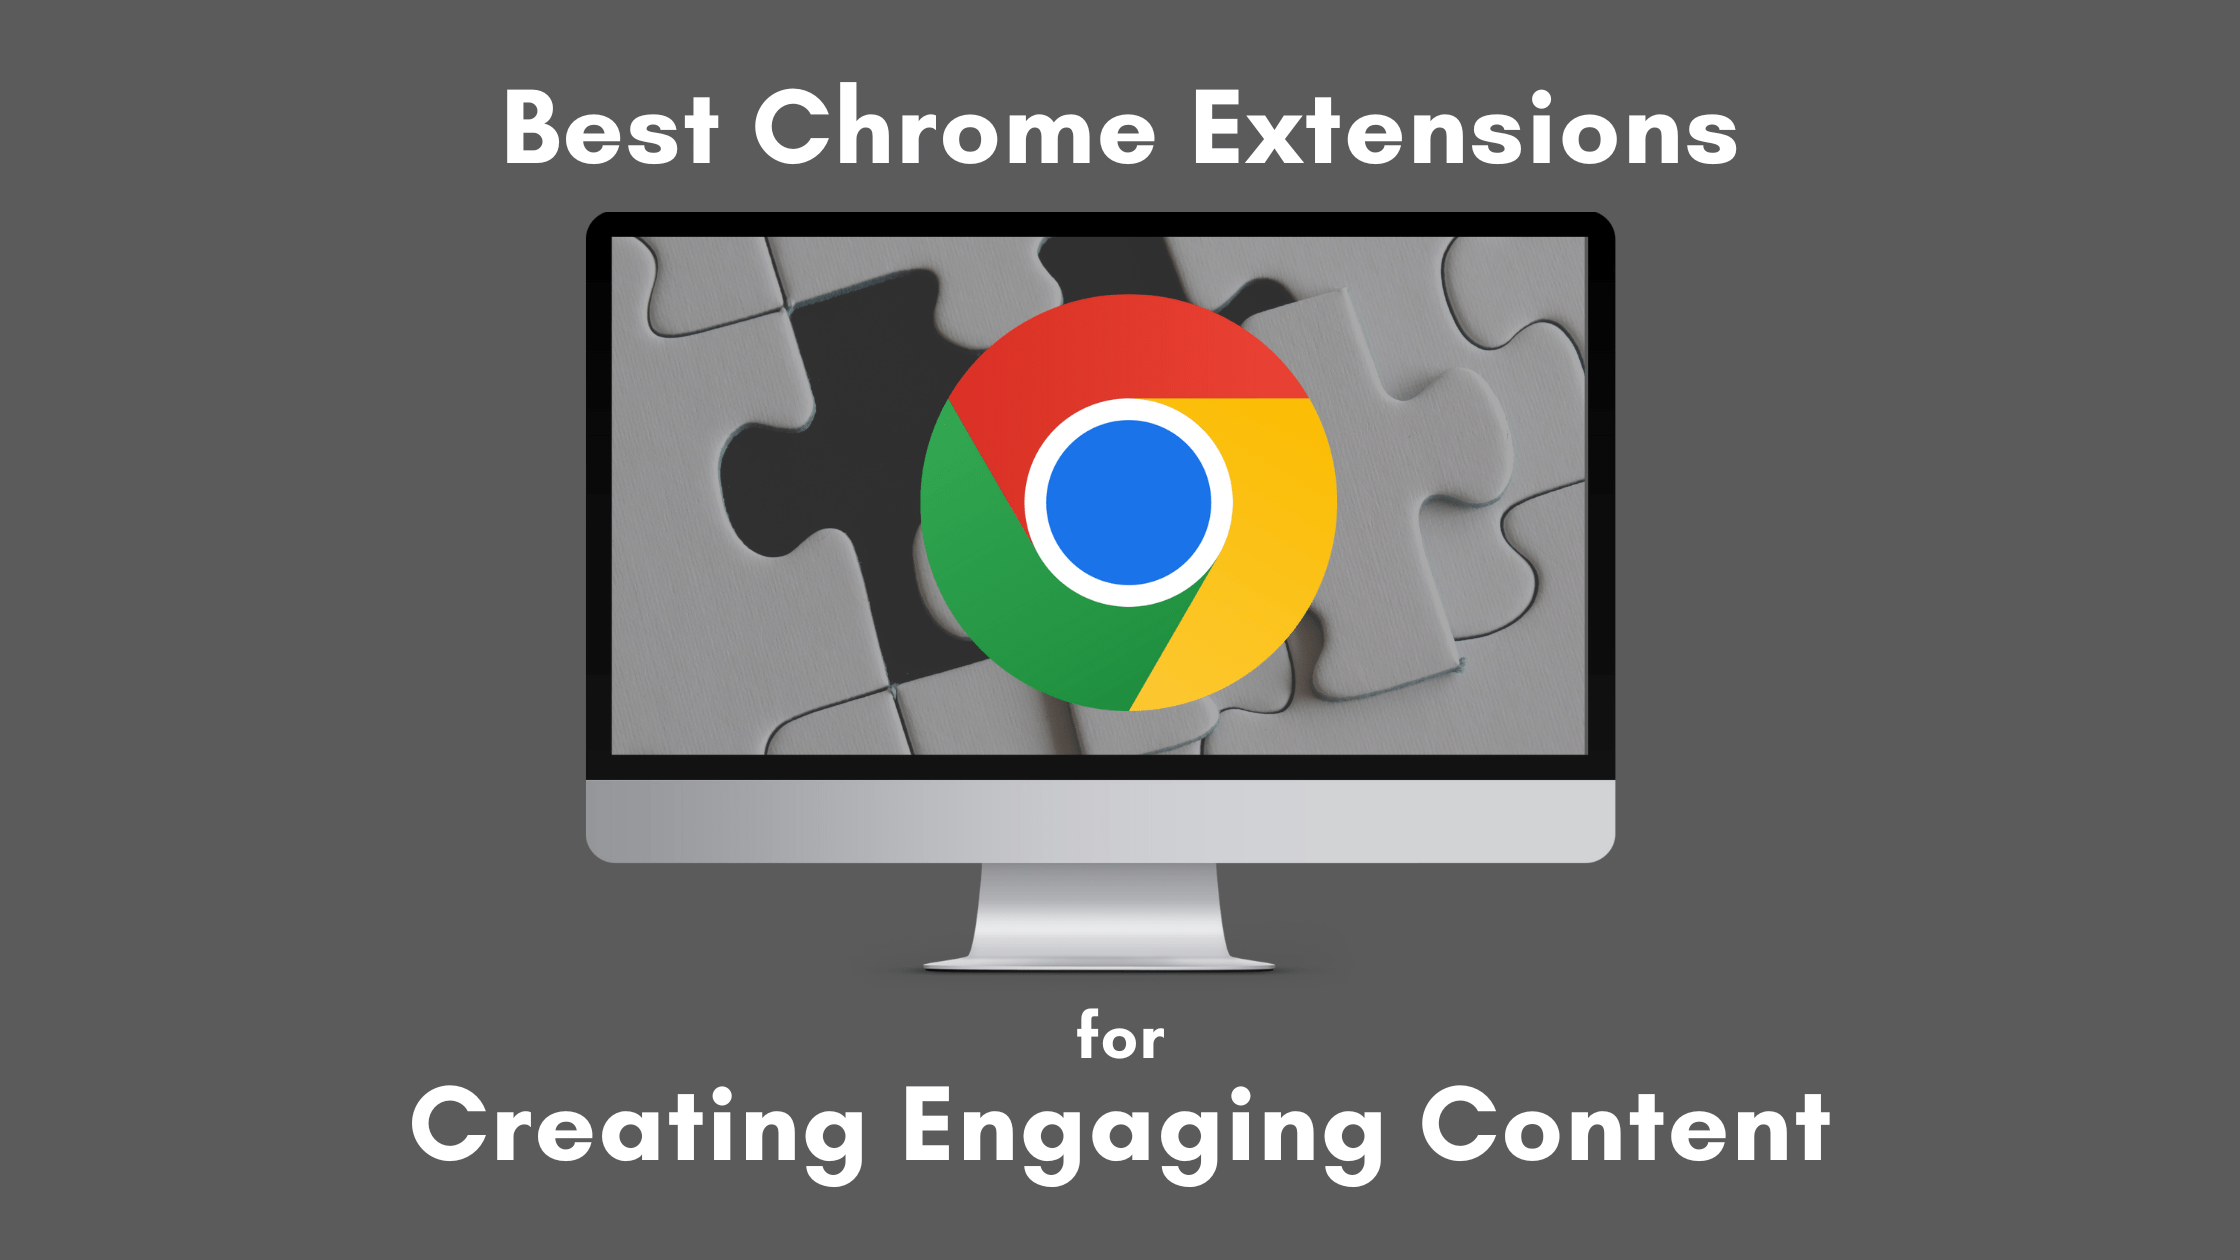 10 Best Chrome Extensions for Creating Engaging Digital Content